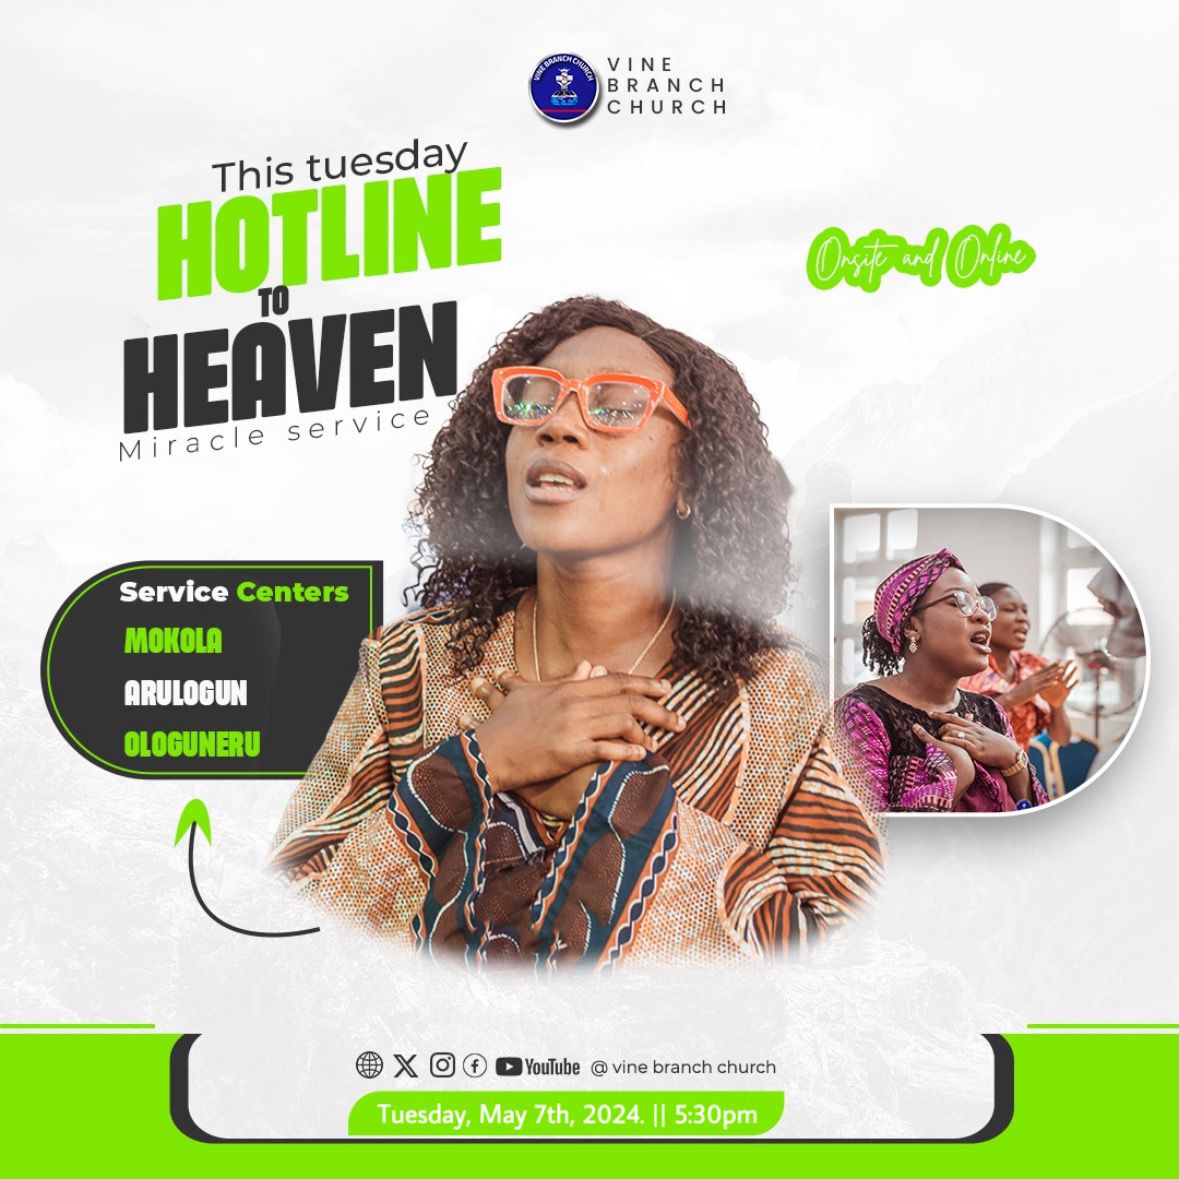 Join us this Tuesday at 5:30 pm for Hotline-to-Heaven.
…and experience the burden-breaking, yoke-destroying power of GOD!

Don't miss out!

This Tuesday | 5:30pm

#HotlineToHeaven
#VineBranchChurch
#VBCservice